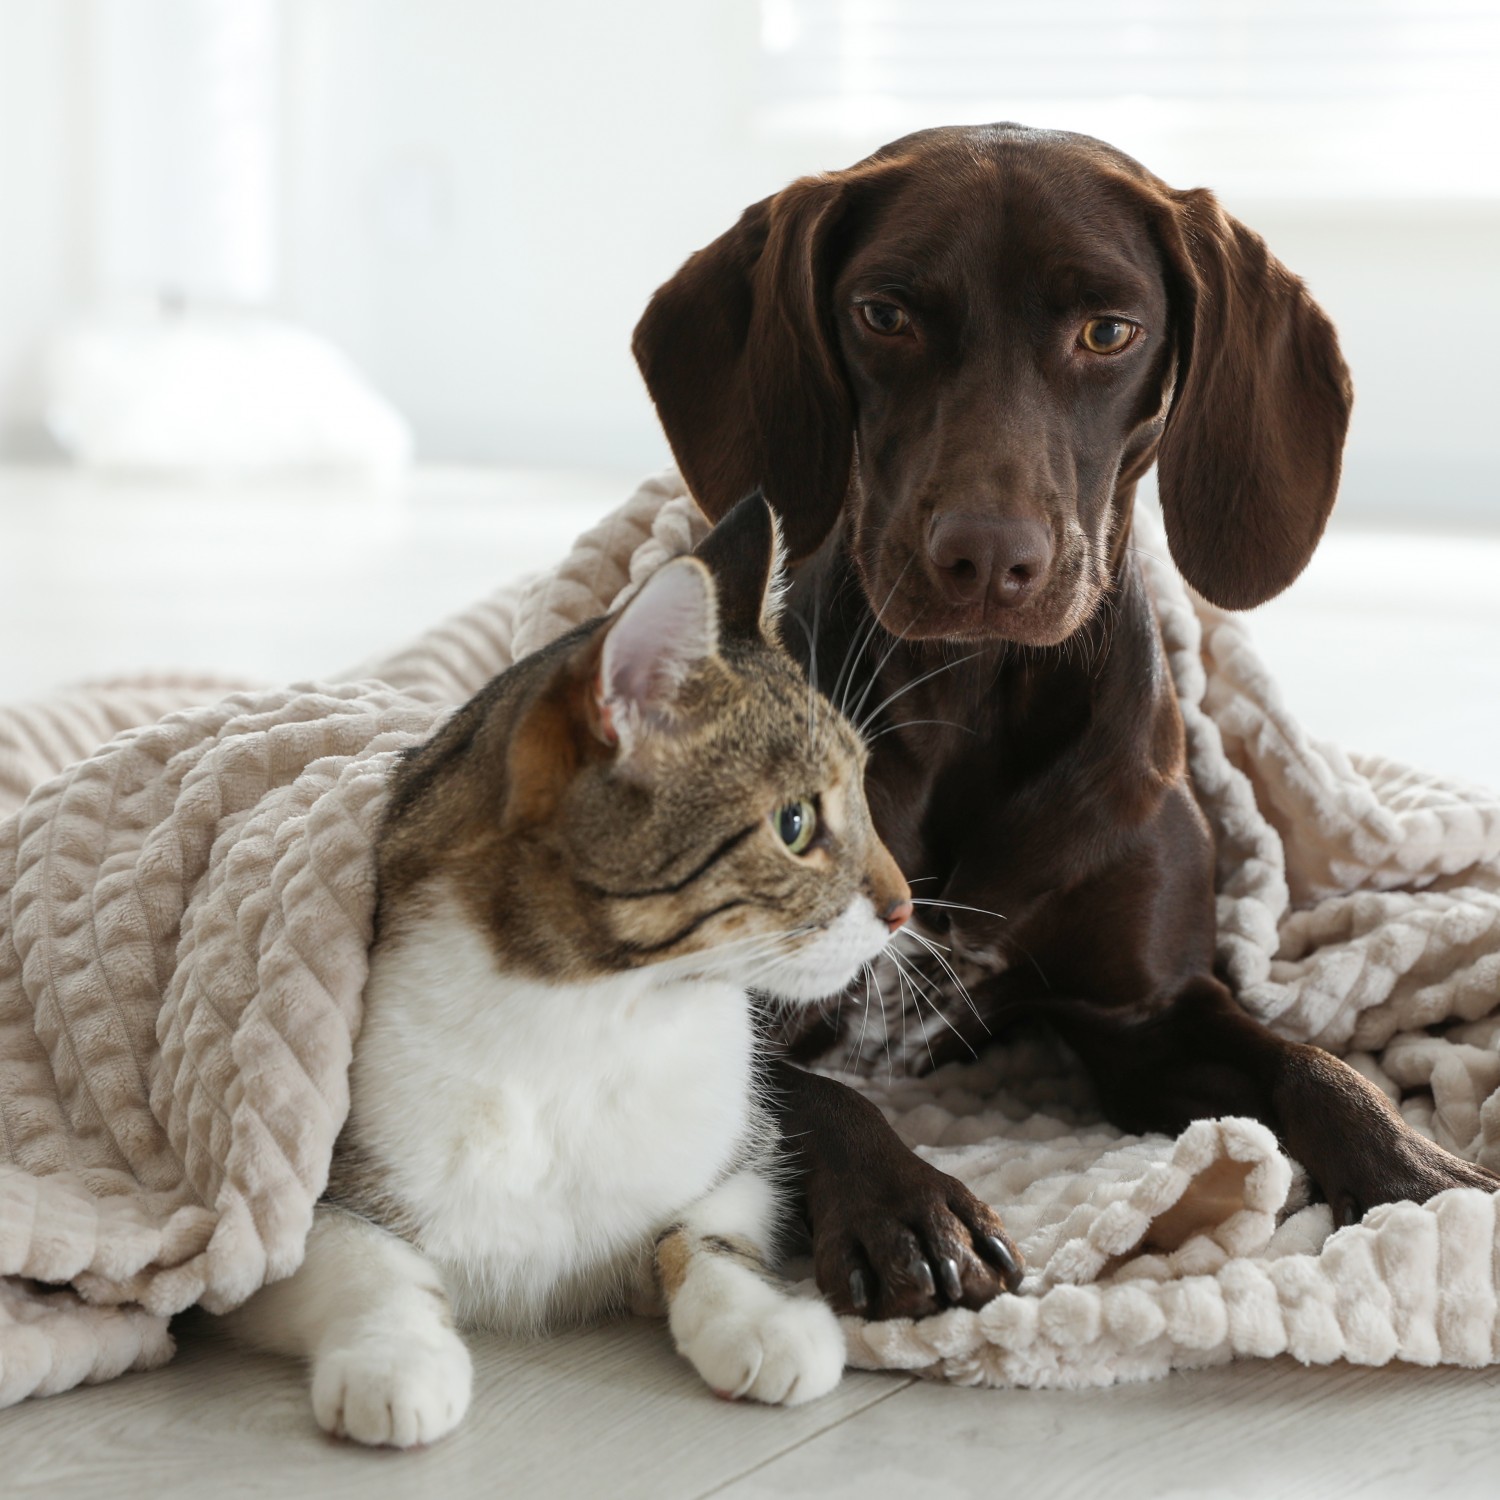 Cat and Dog with Blanket